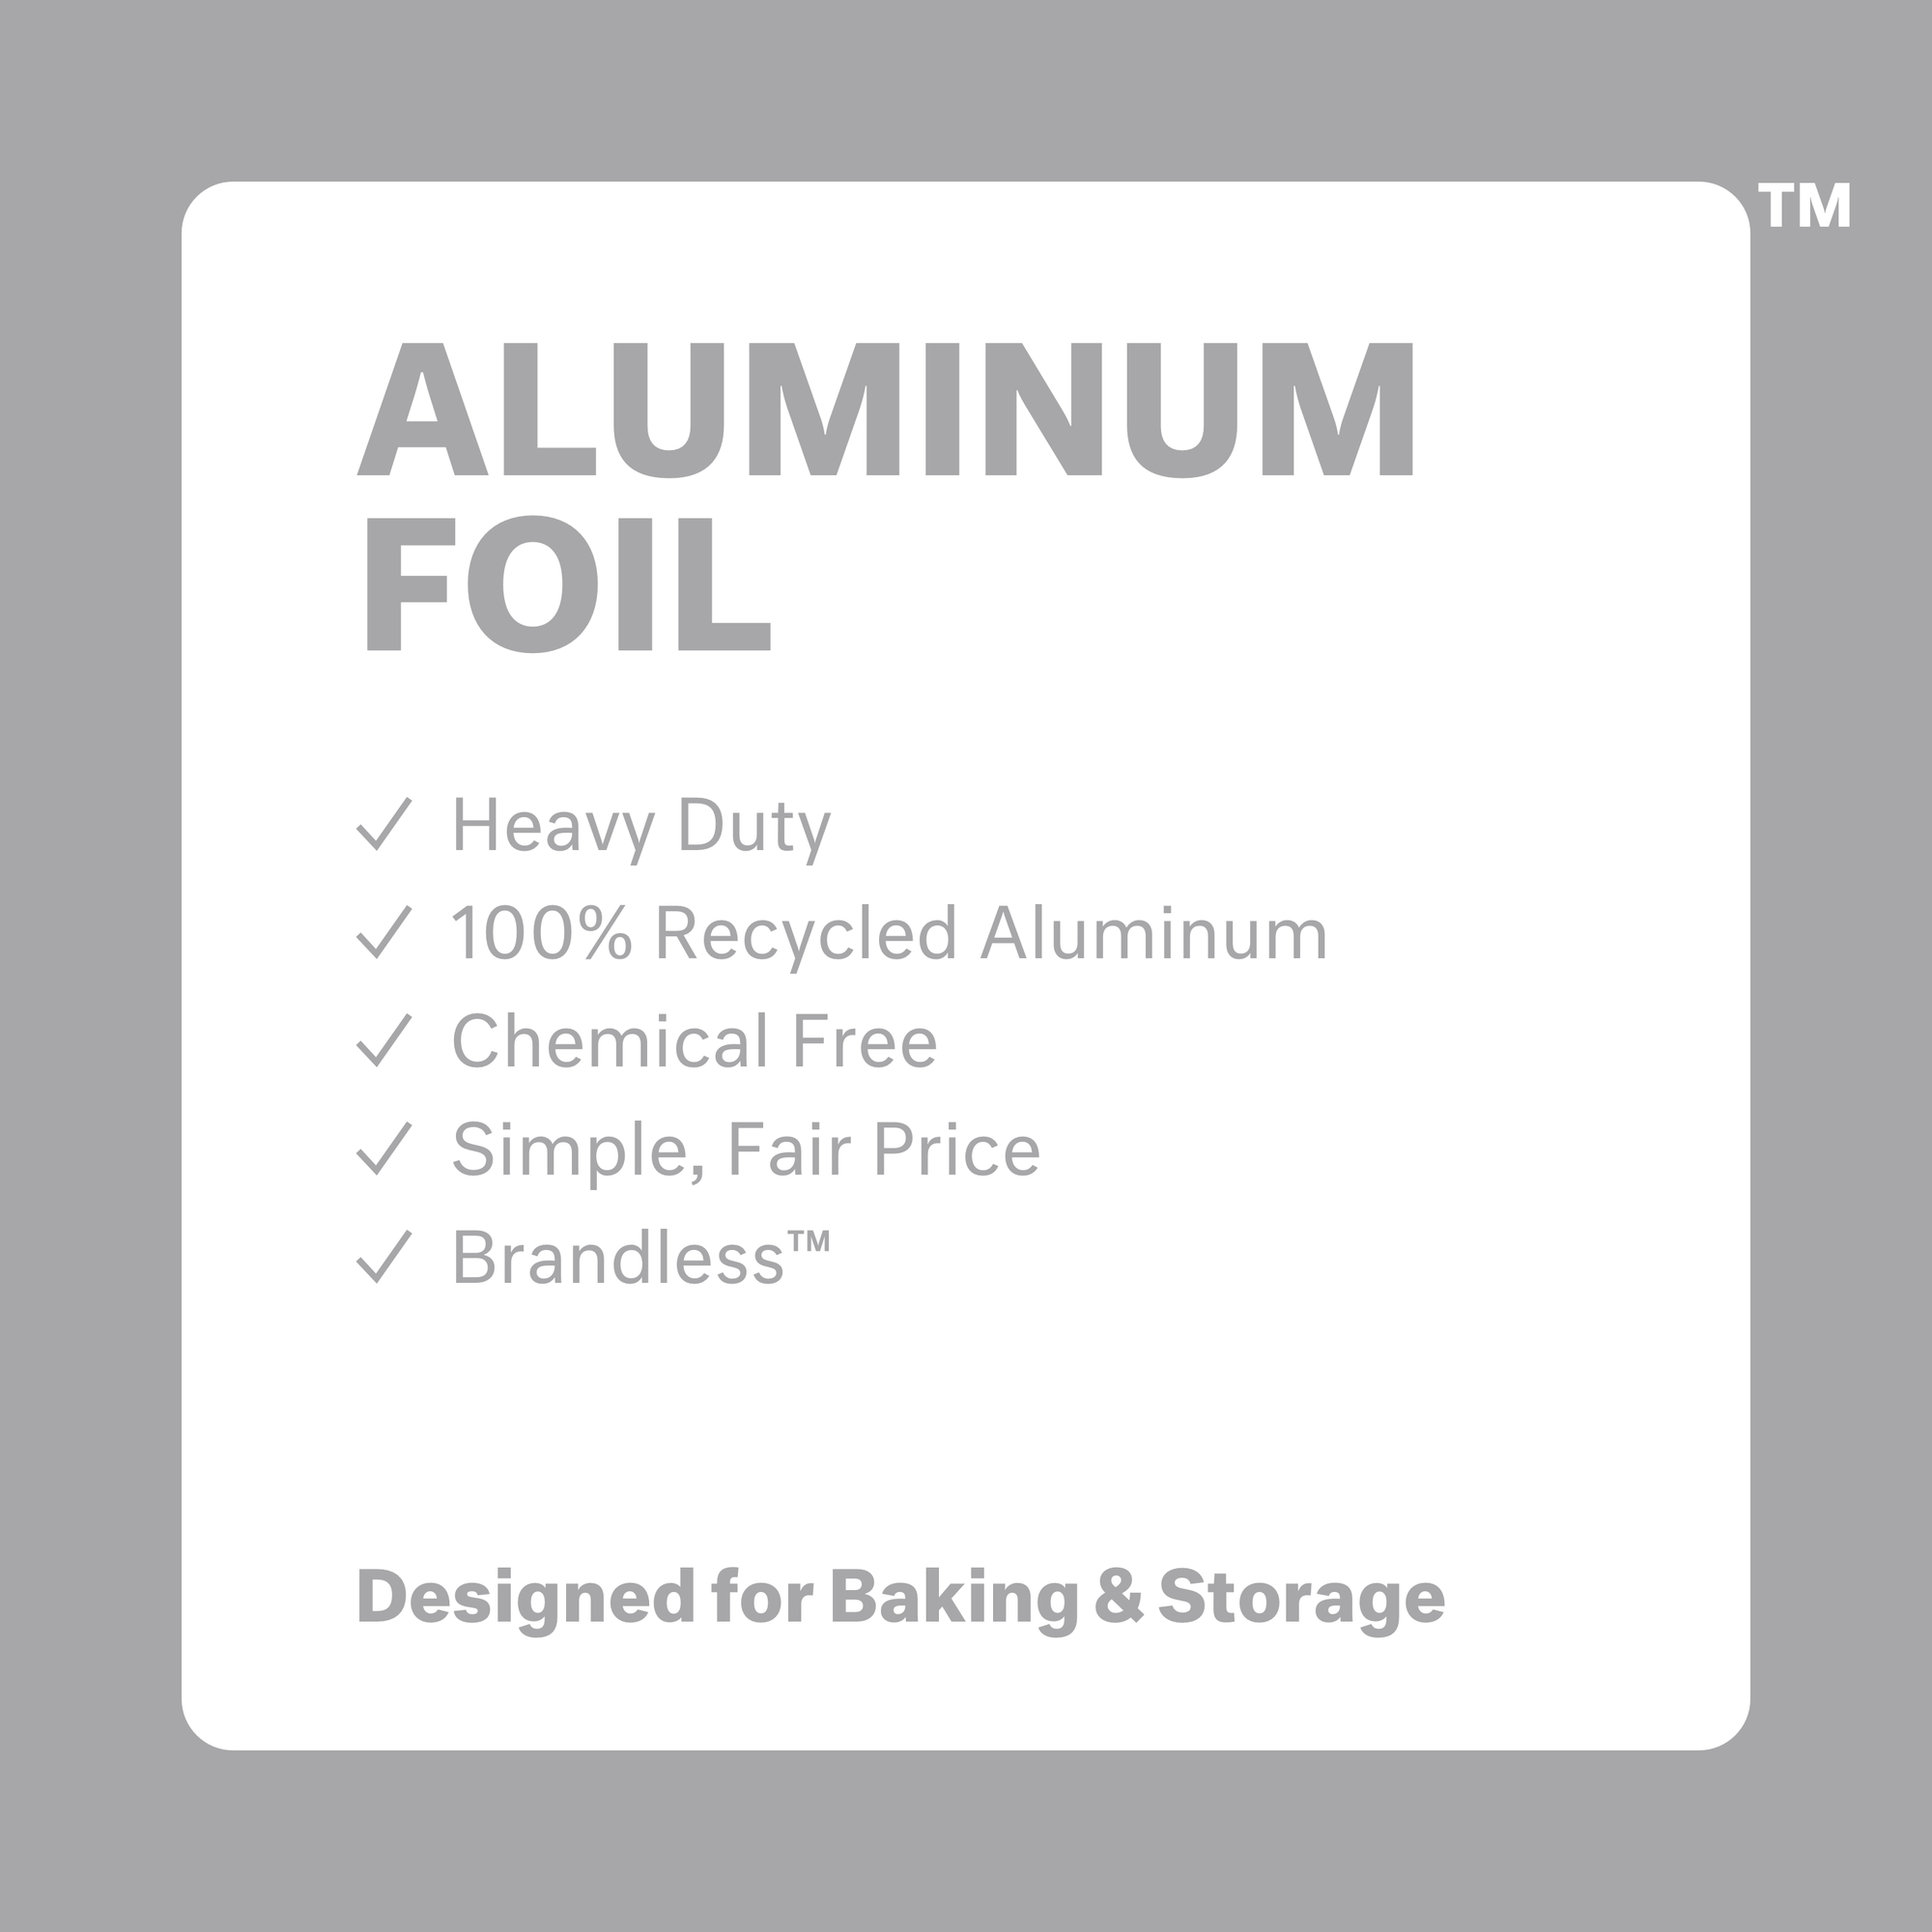 Buy 3 get 1 free! Aluminum foil: heavy duty, 100% recycled aluminum, chemical free, simple, fair price, brandless. Designed for baking and storage.